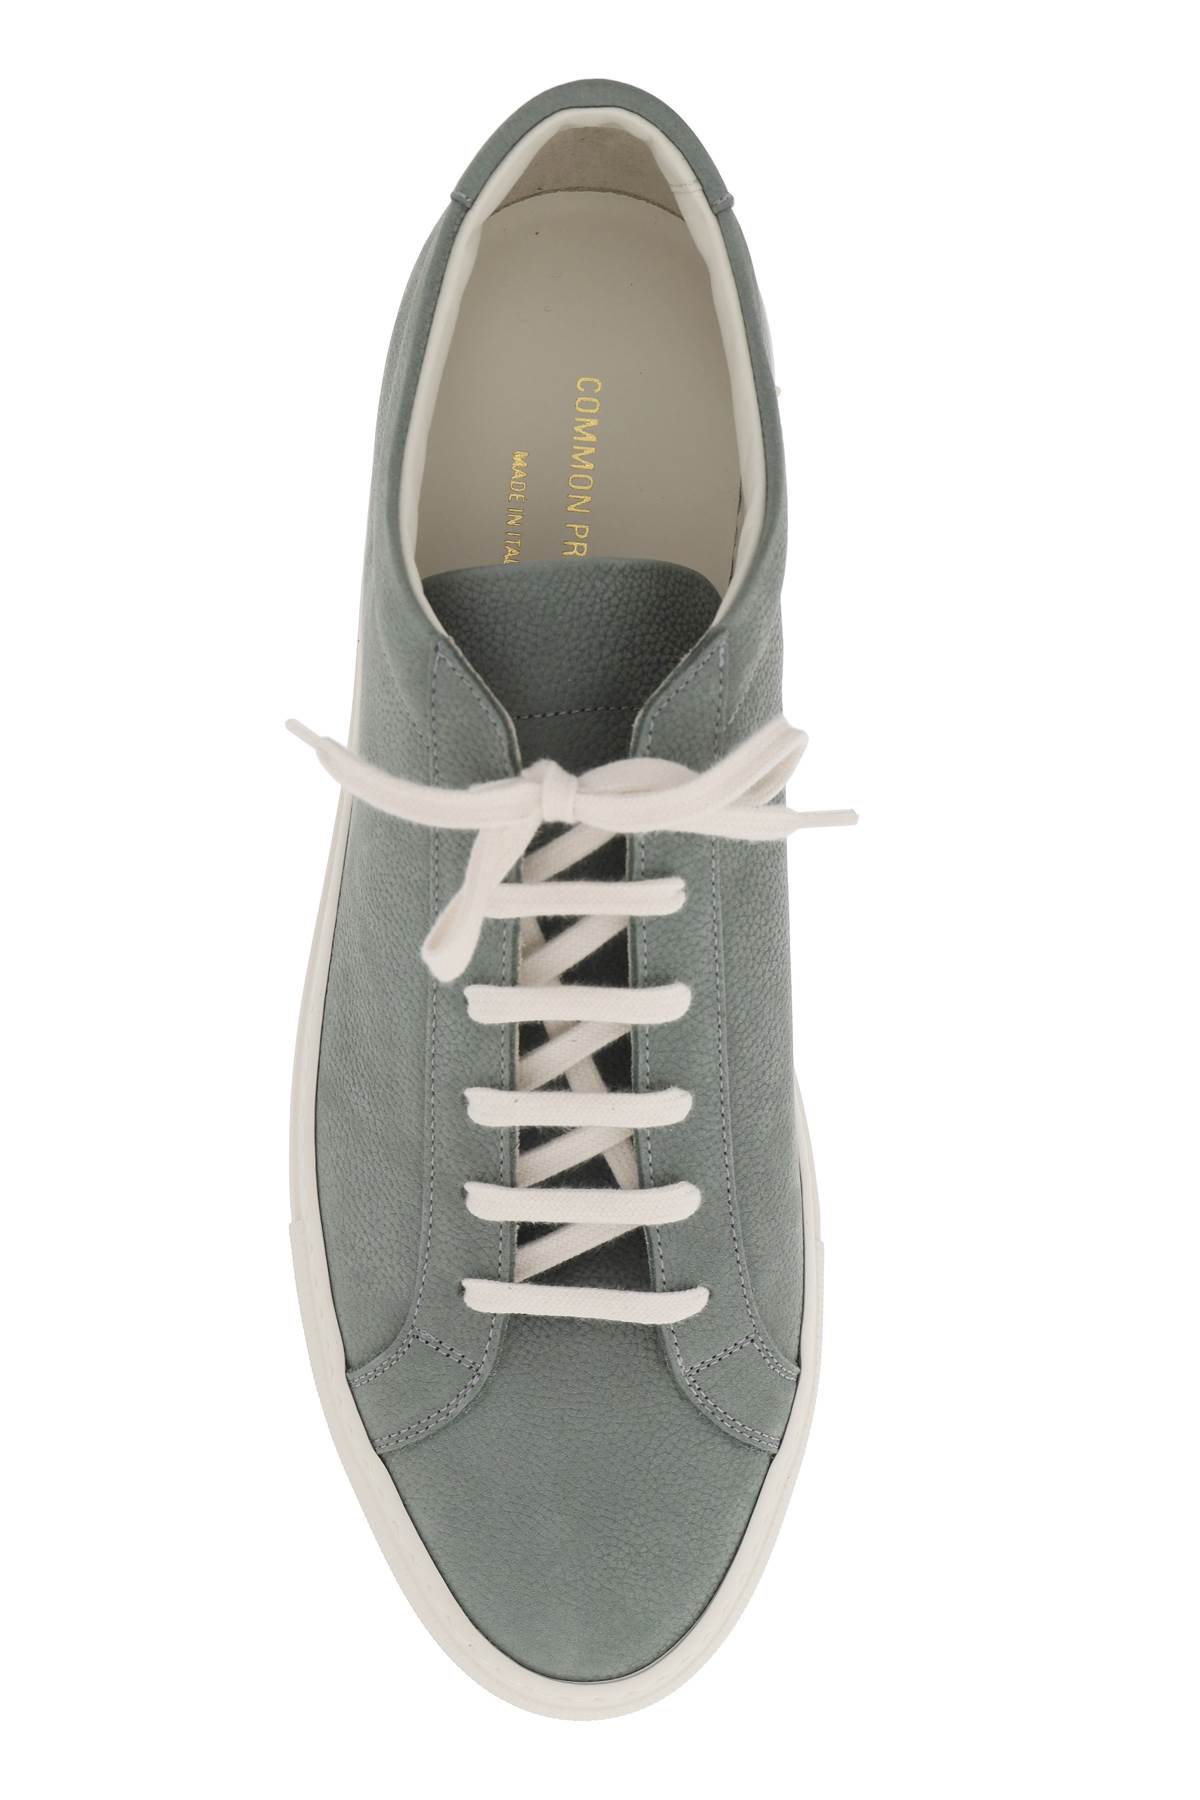 Shop Common Projects Original Achilles Leather Sneakers In Sage (green)